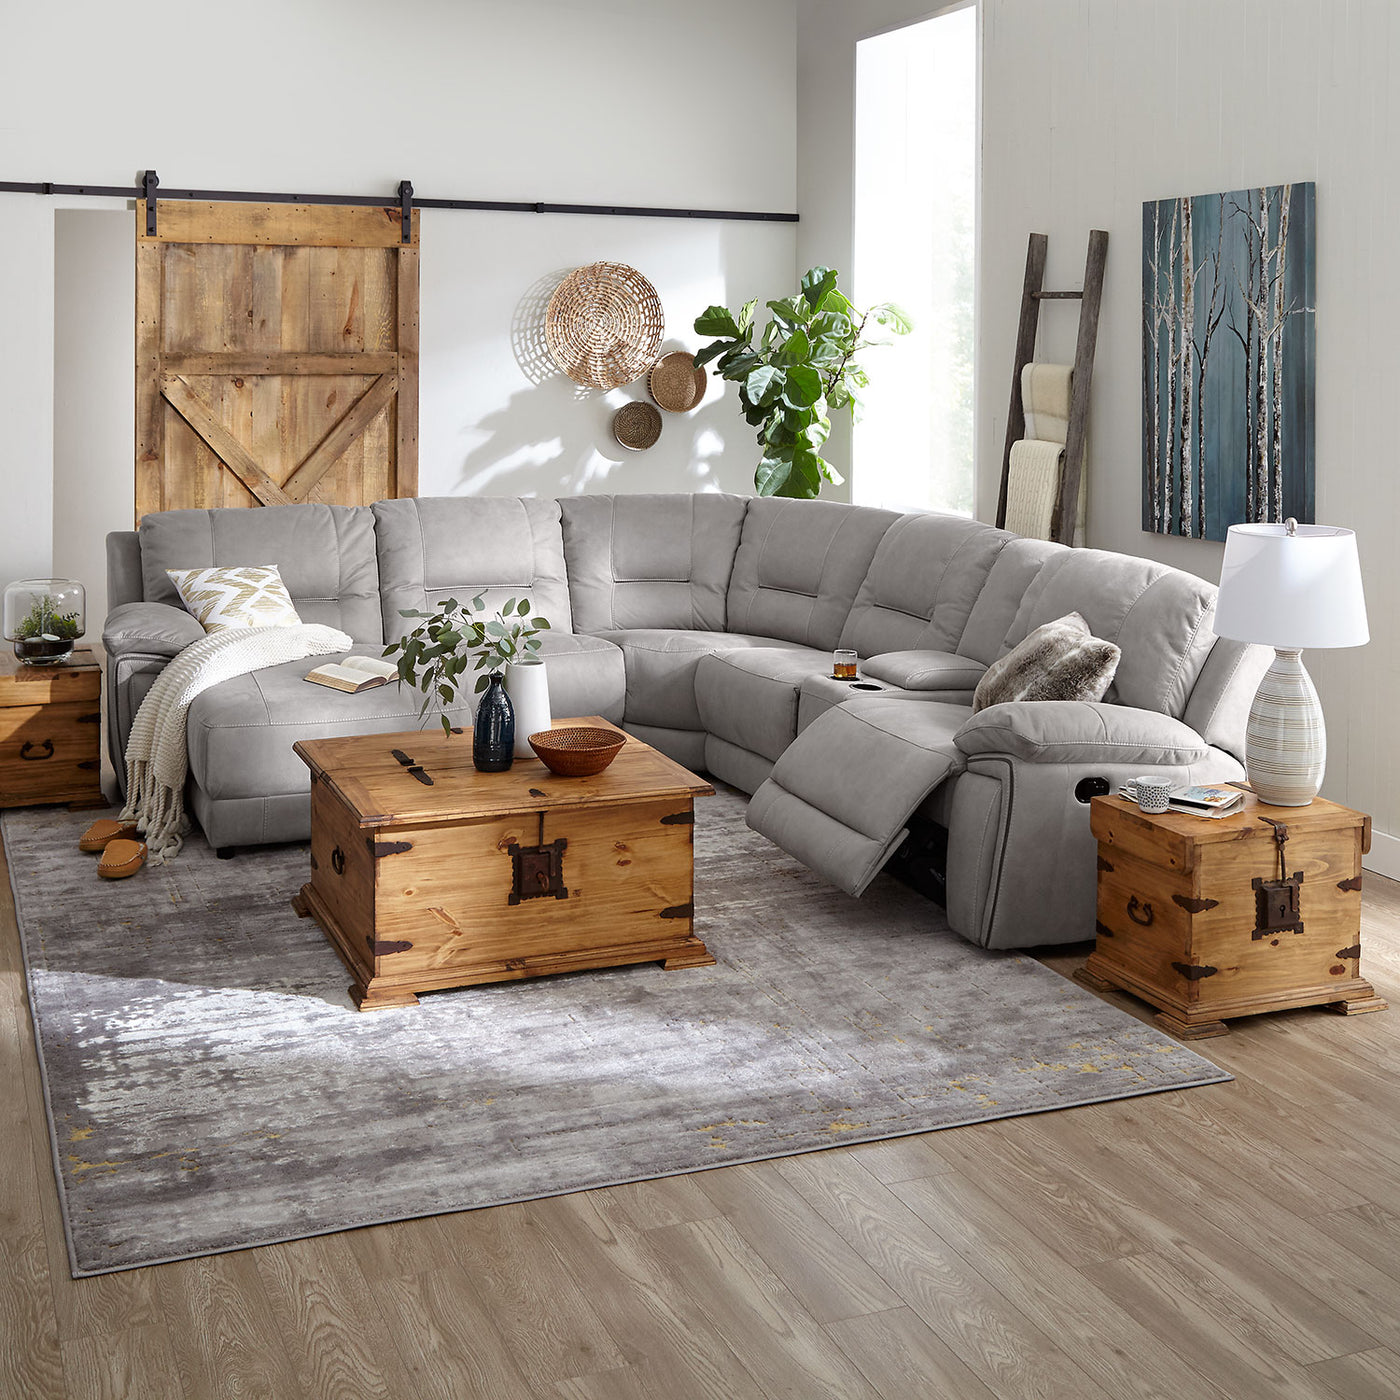 Pasadena 6-Piece Reclining Sectional with Left-Facing Chaise - Light Grey